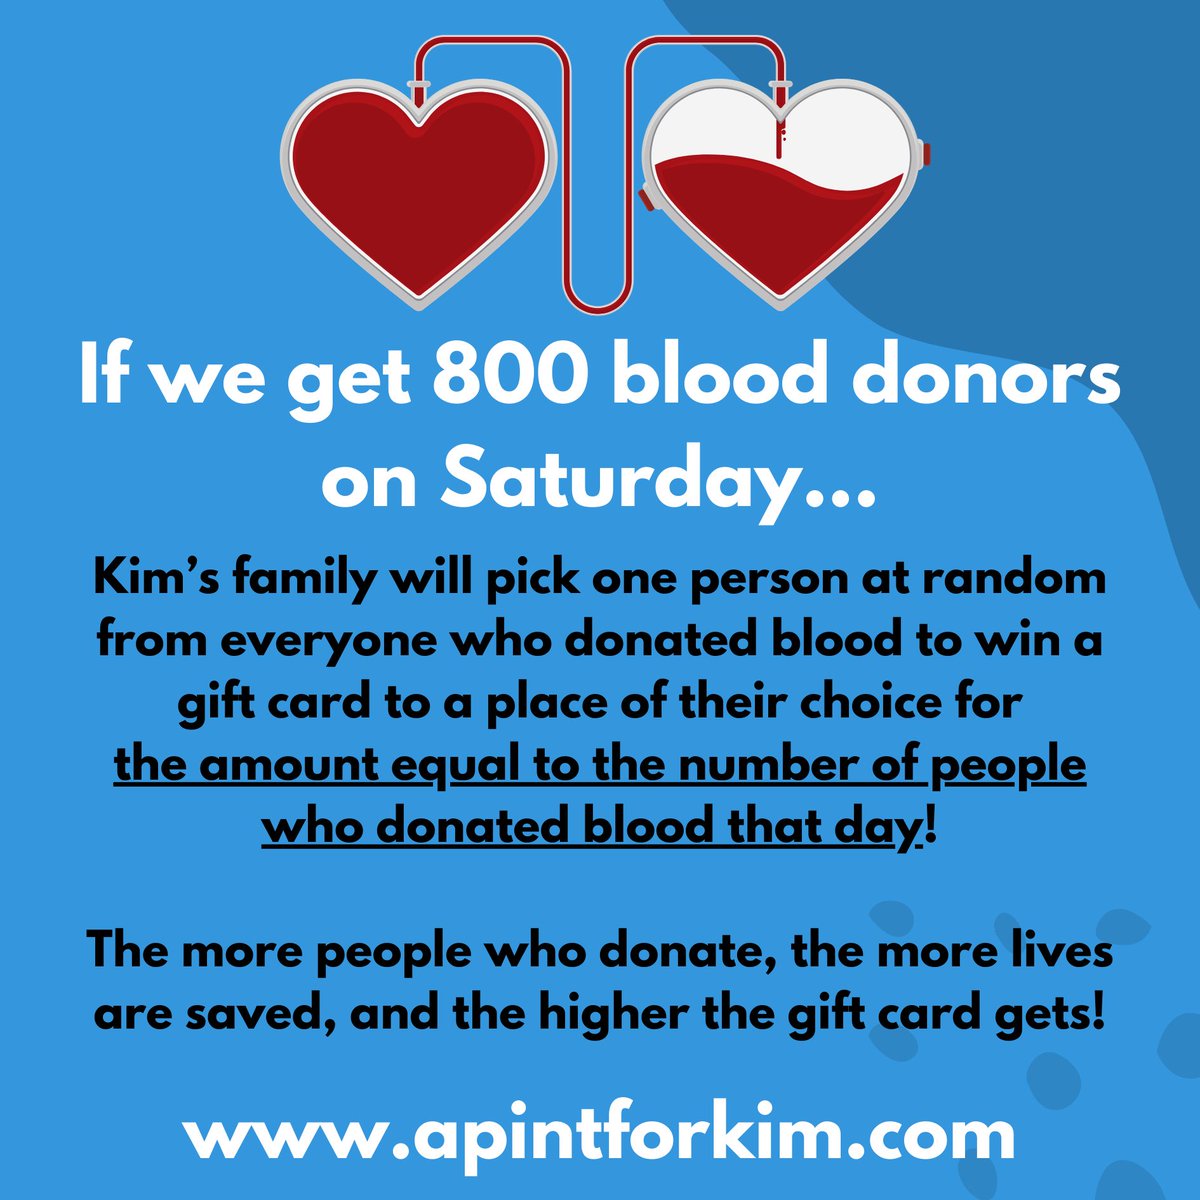 Making this commitment right now. If we get 800 pints on Saturday, we will give out a gift card equal to the amount of pints collected to one random blood donor. (Even if you don’t pass the health screening you’re still on the list we draw from!) LET’S RALLY!